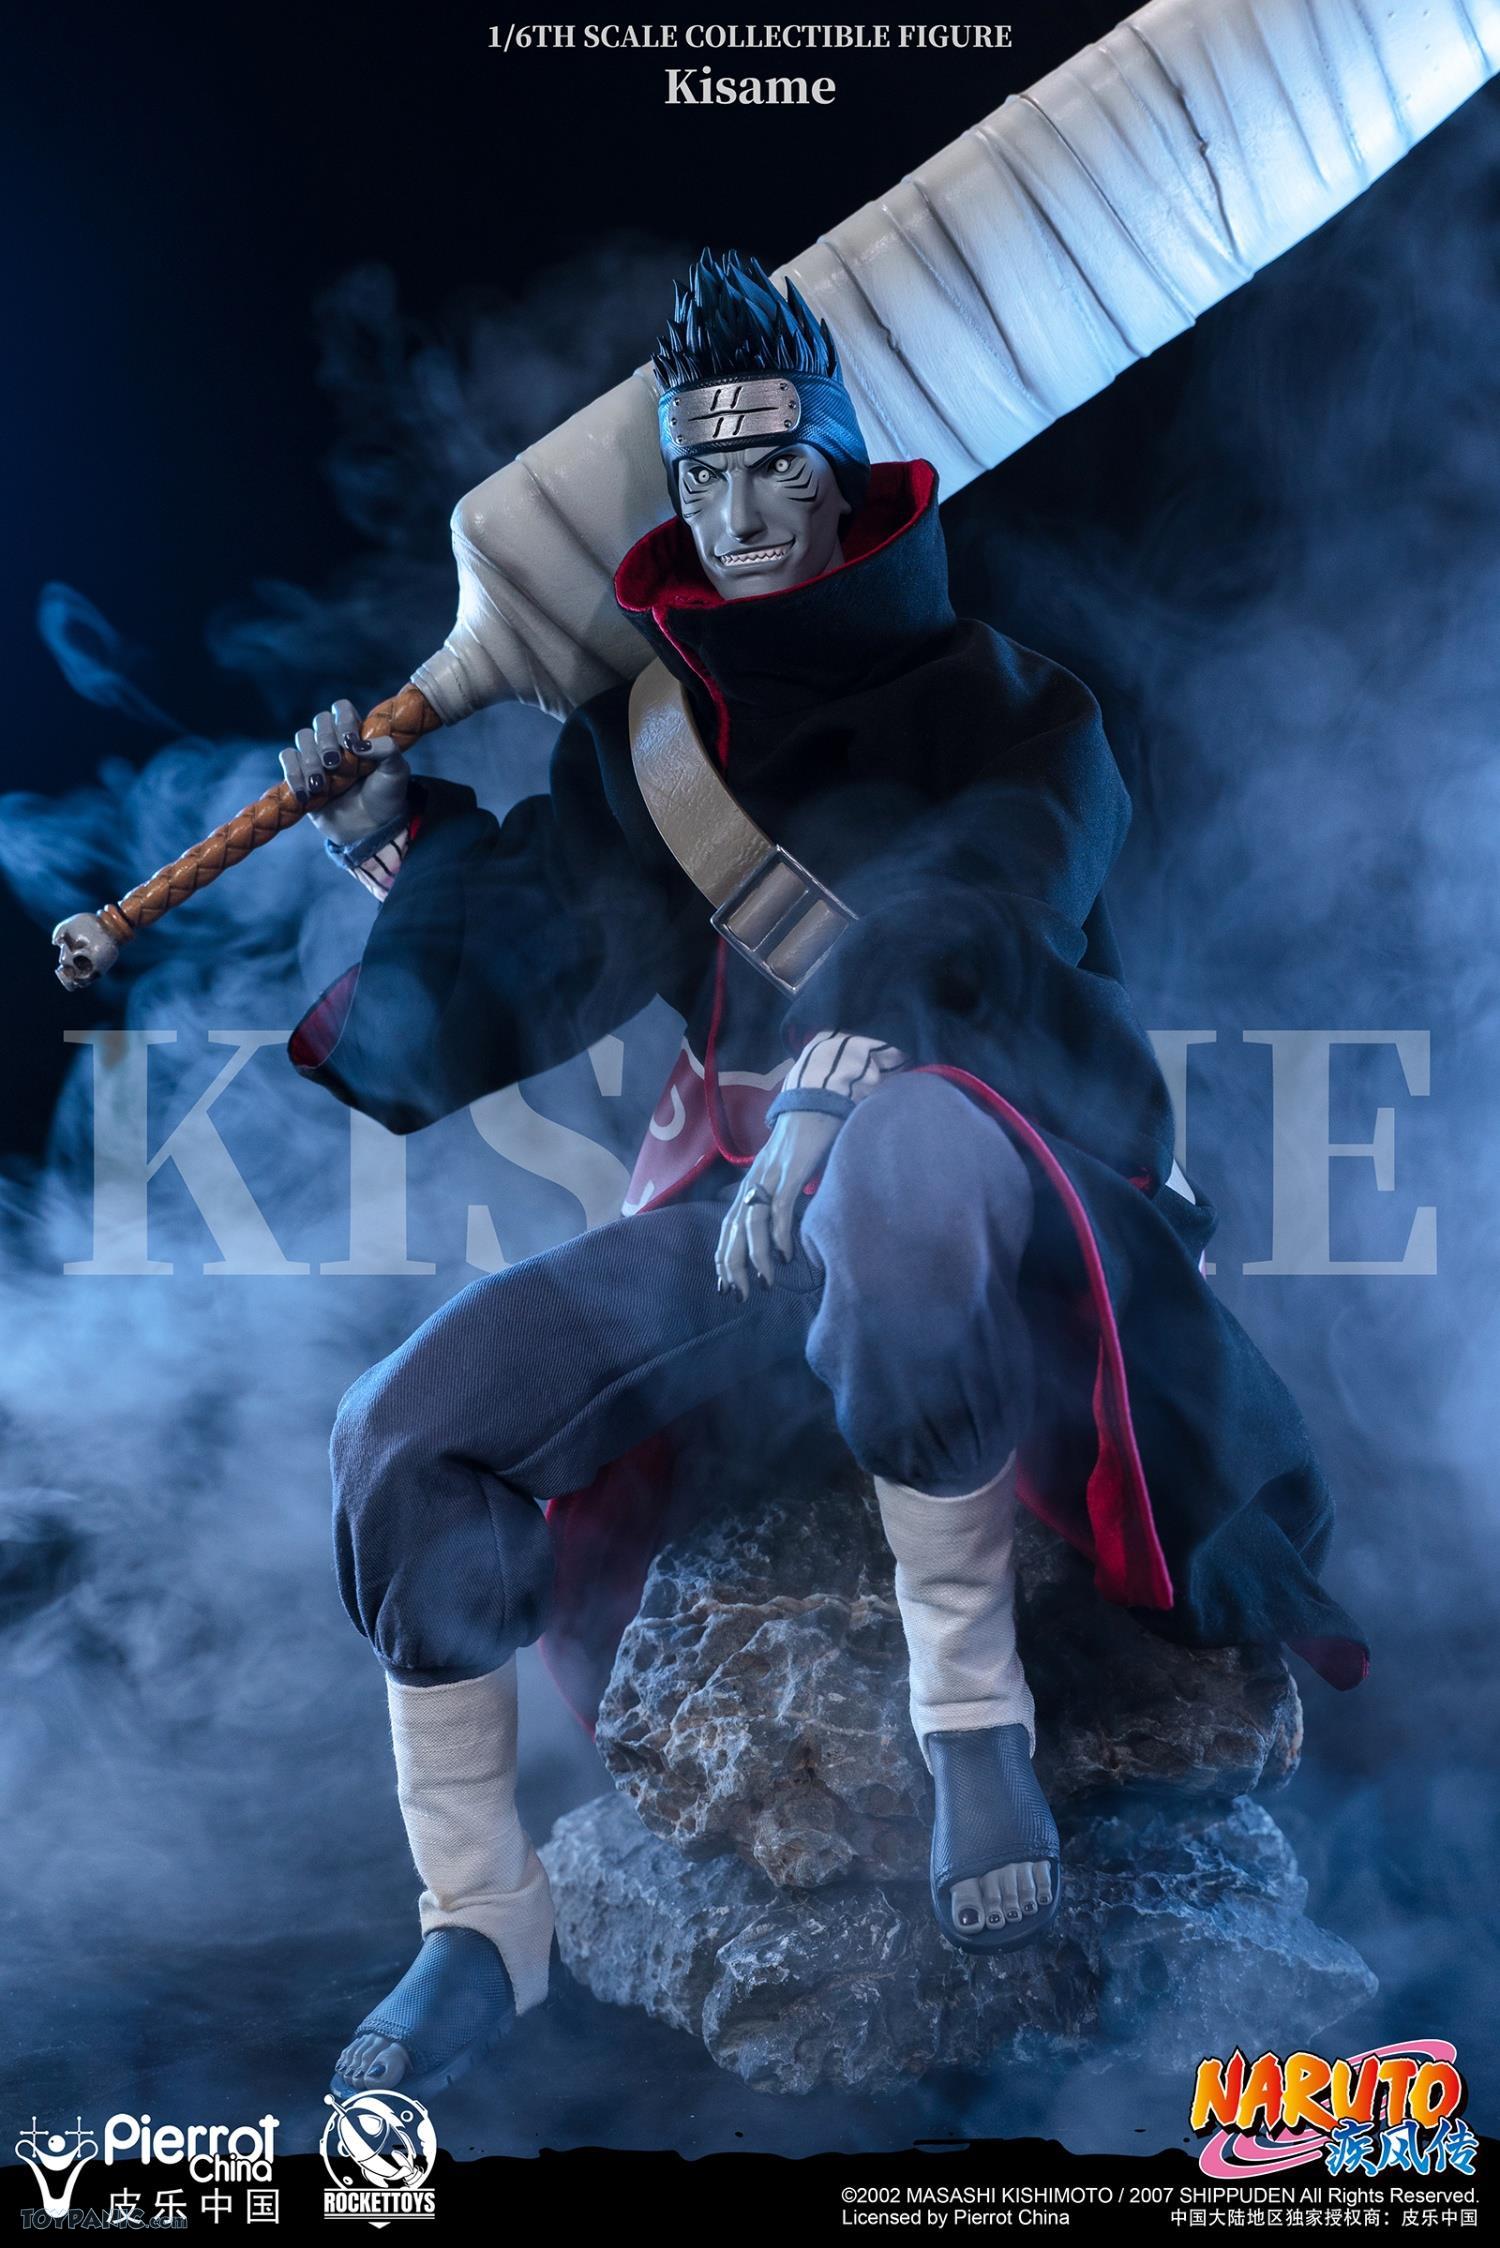 rockettoys - NEW PRODUCT: Rocket Toys ROC-007 1/6 Scale Kisame 221202460434PM_5686661